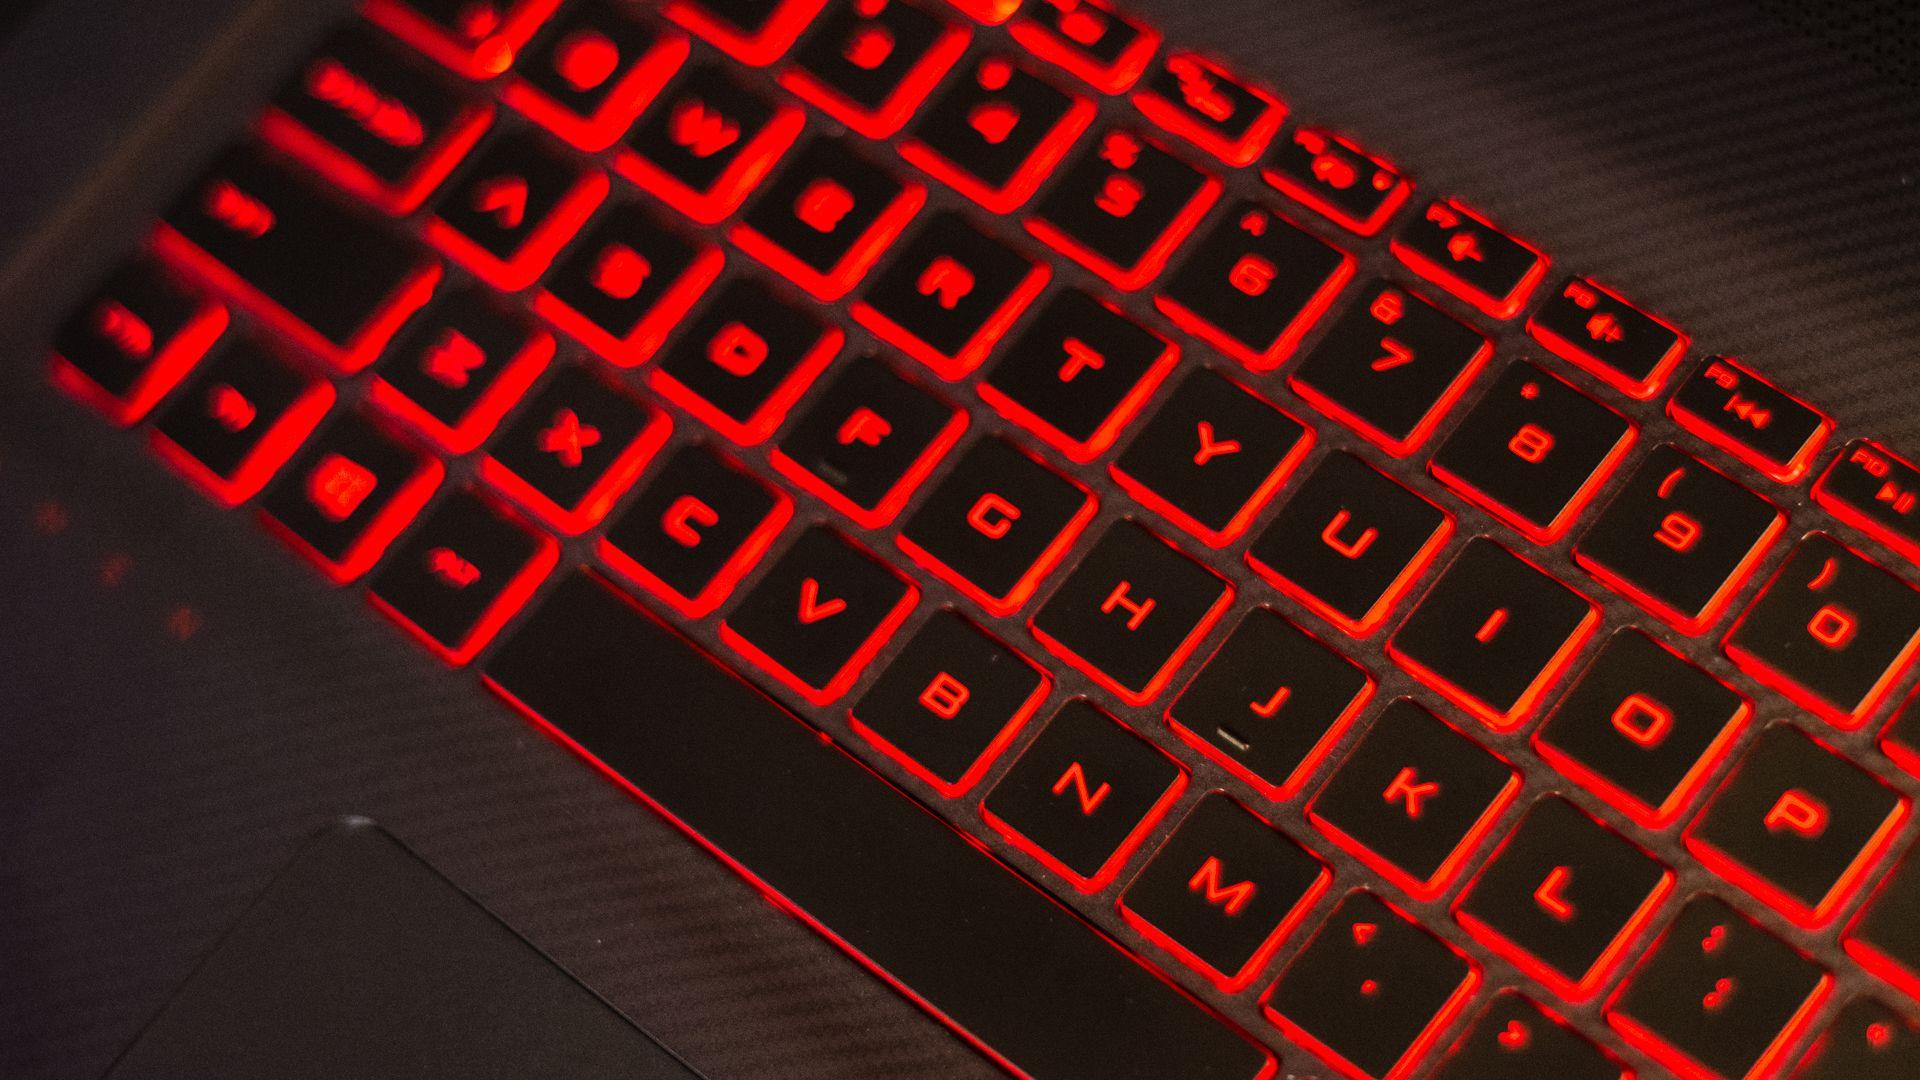 Hp Omen Wallpapers and Backgrounds image Free Download